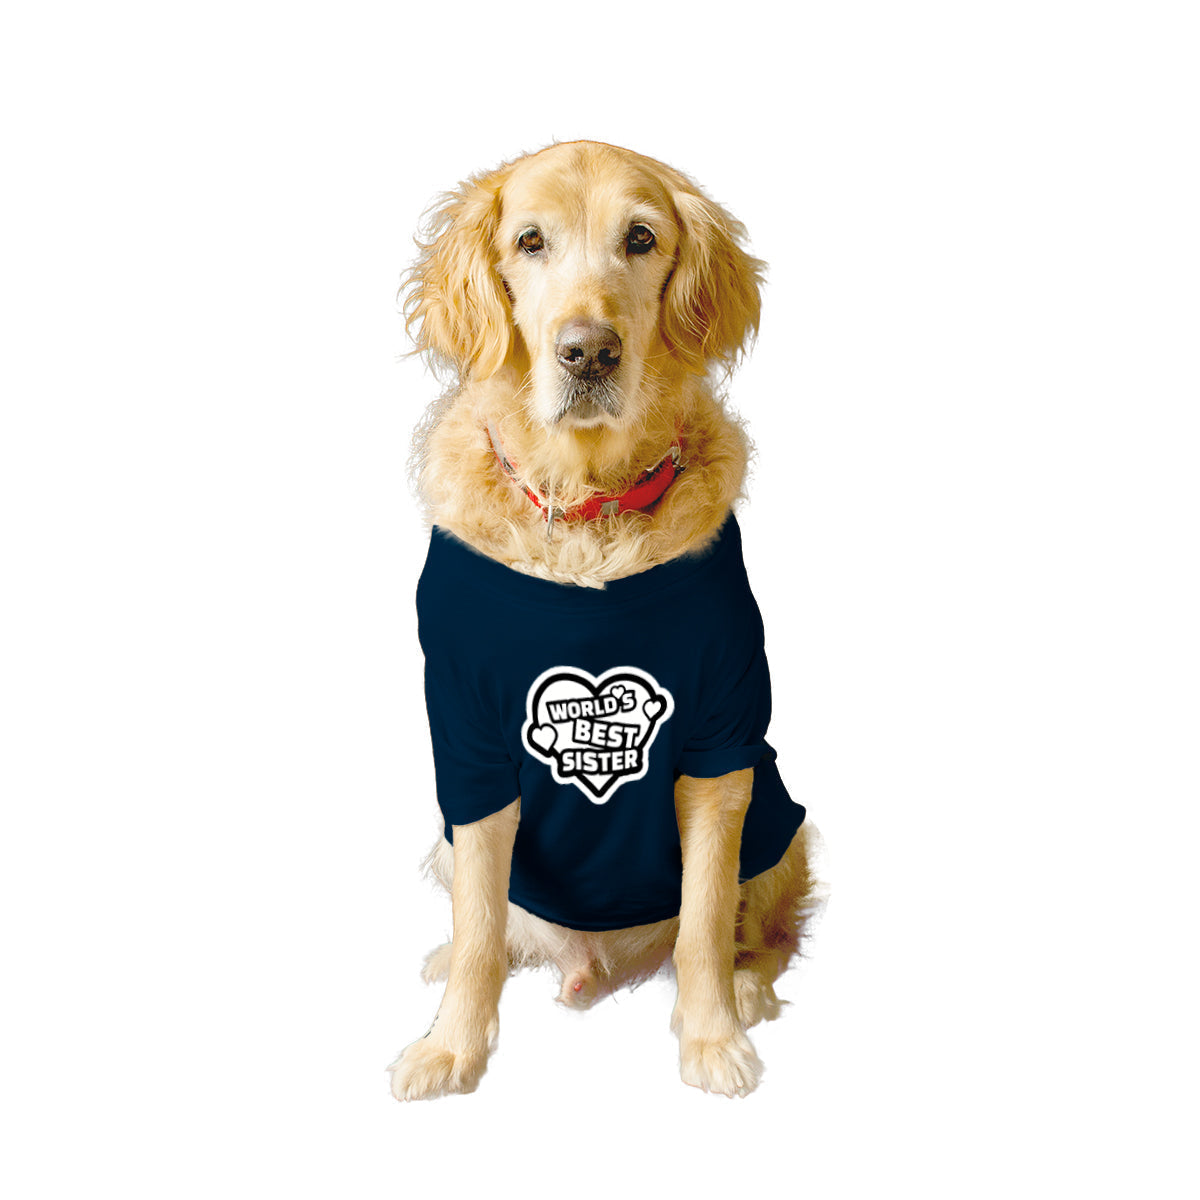 Ruse XX-Small (Chihuahuas, Papillons) / Navy Ruse Basic Crew Neck 'World's Best Sister' Printed Half Sleeves Dog Tee